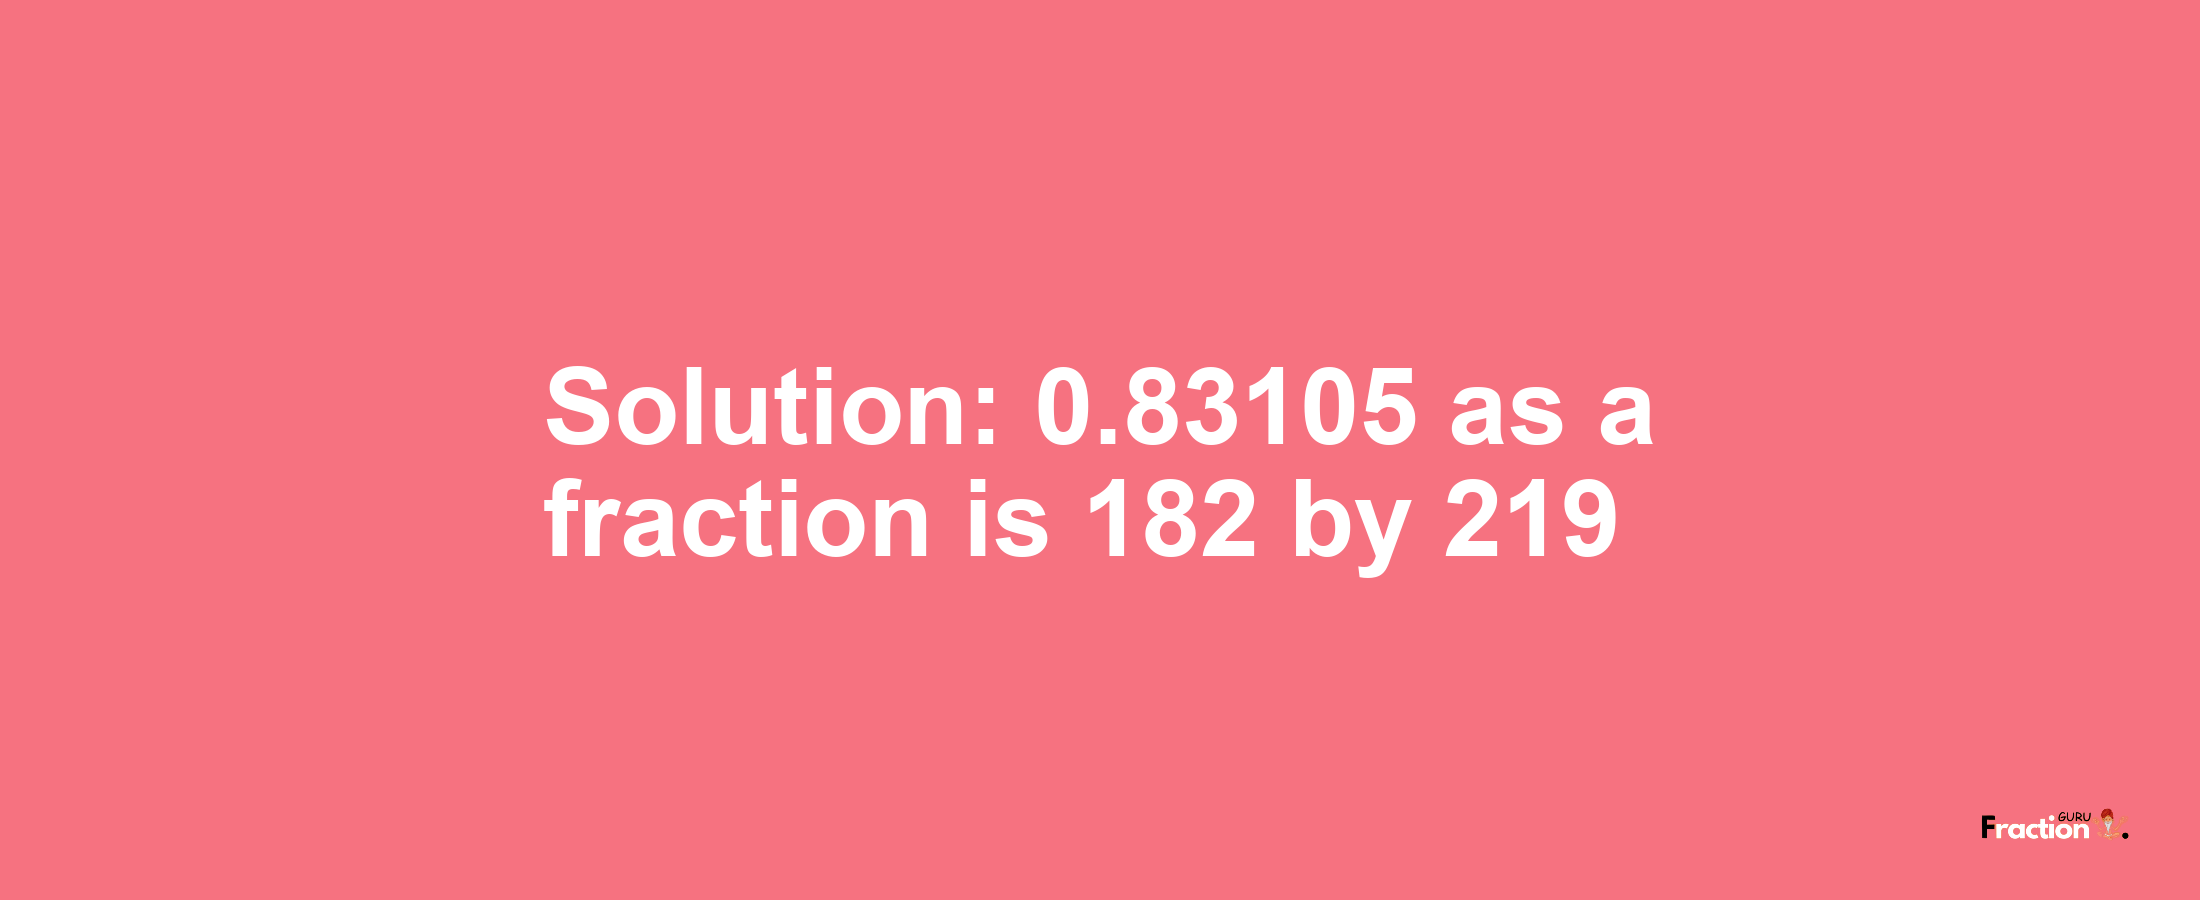 Solution:0.83105 as a fraction is 182/219